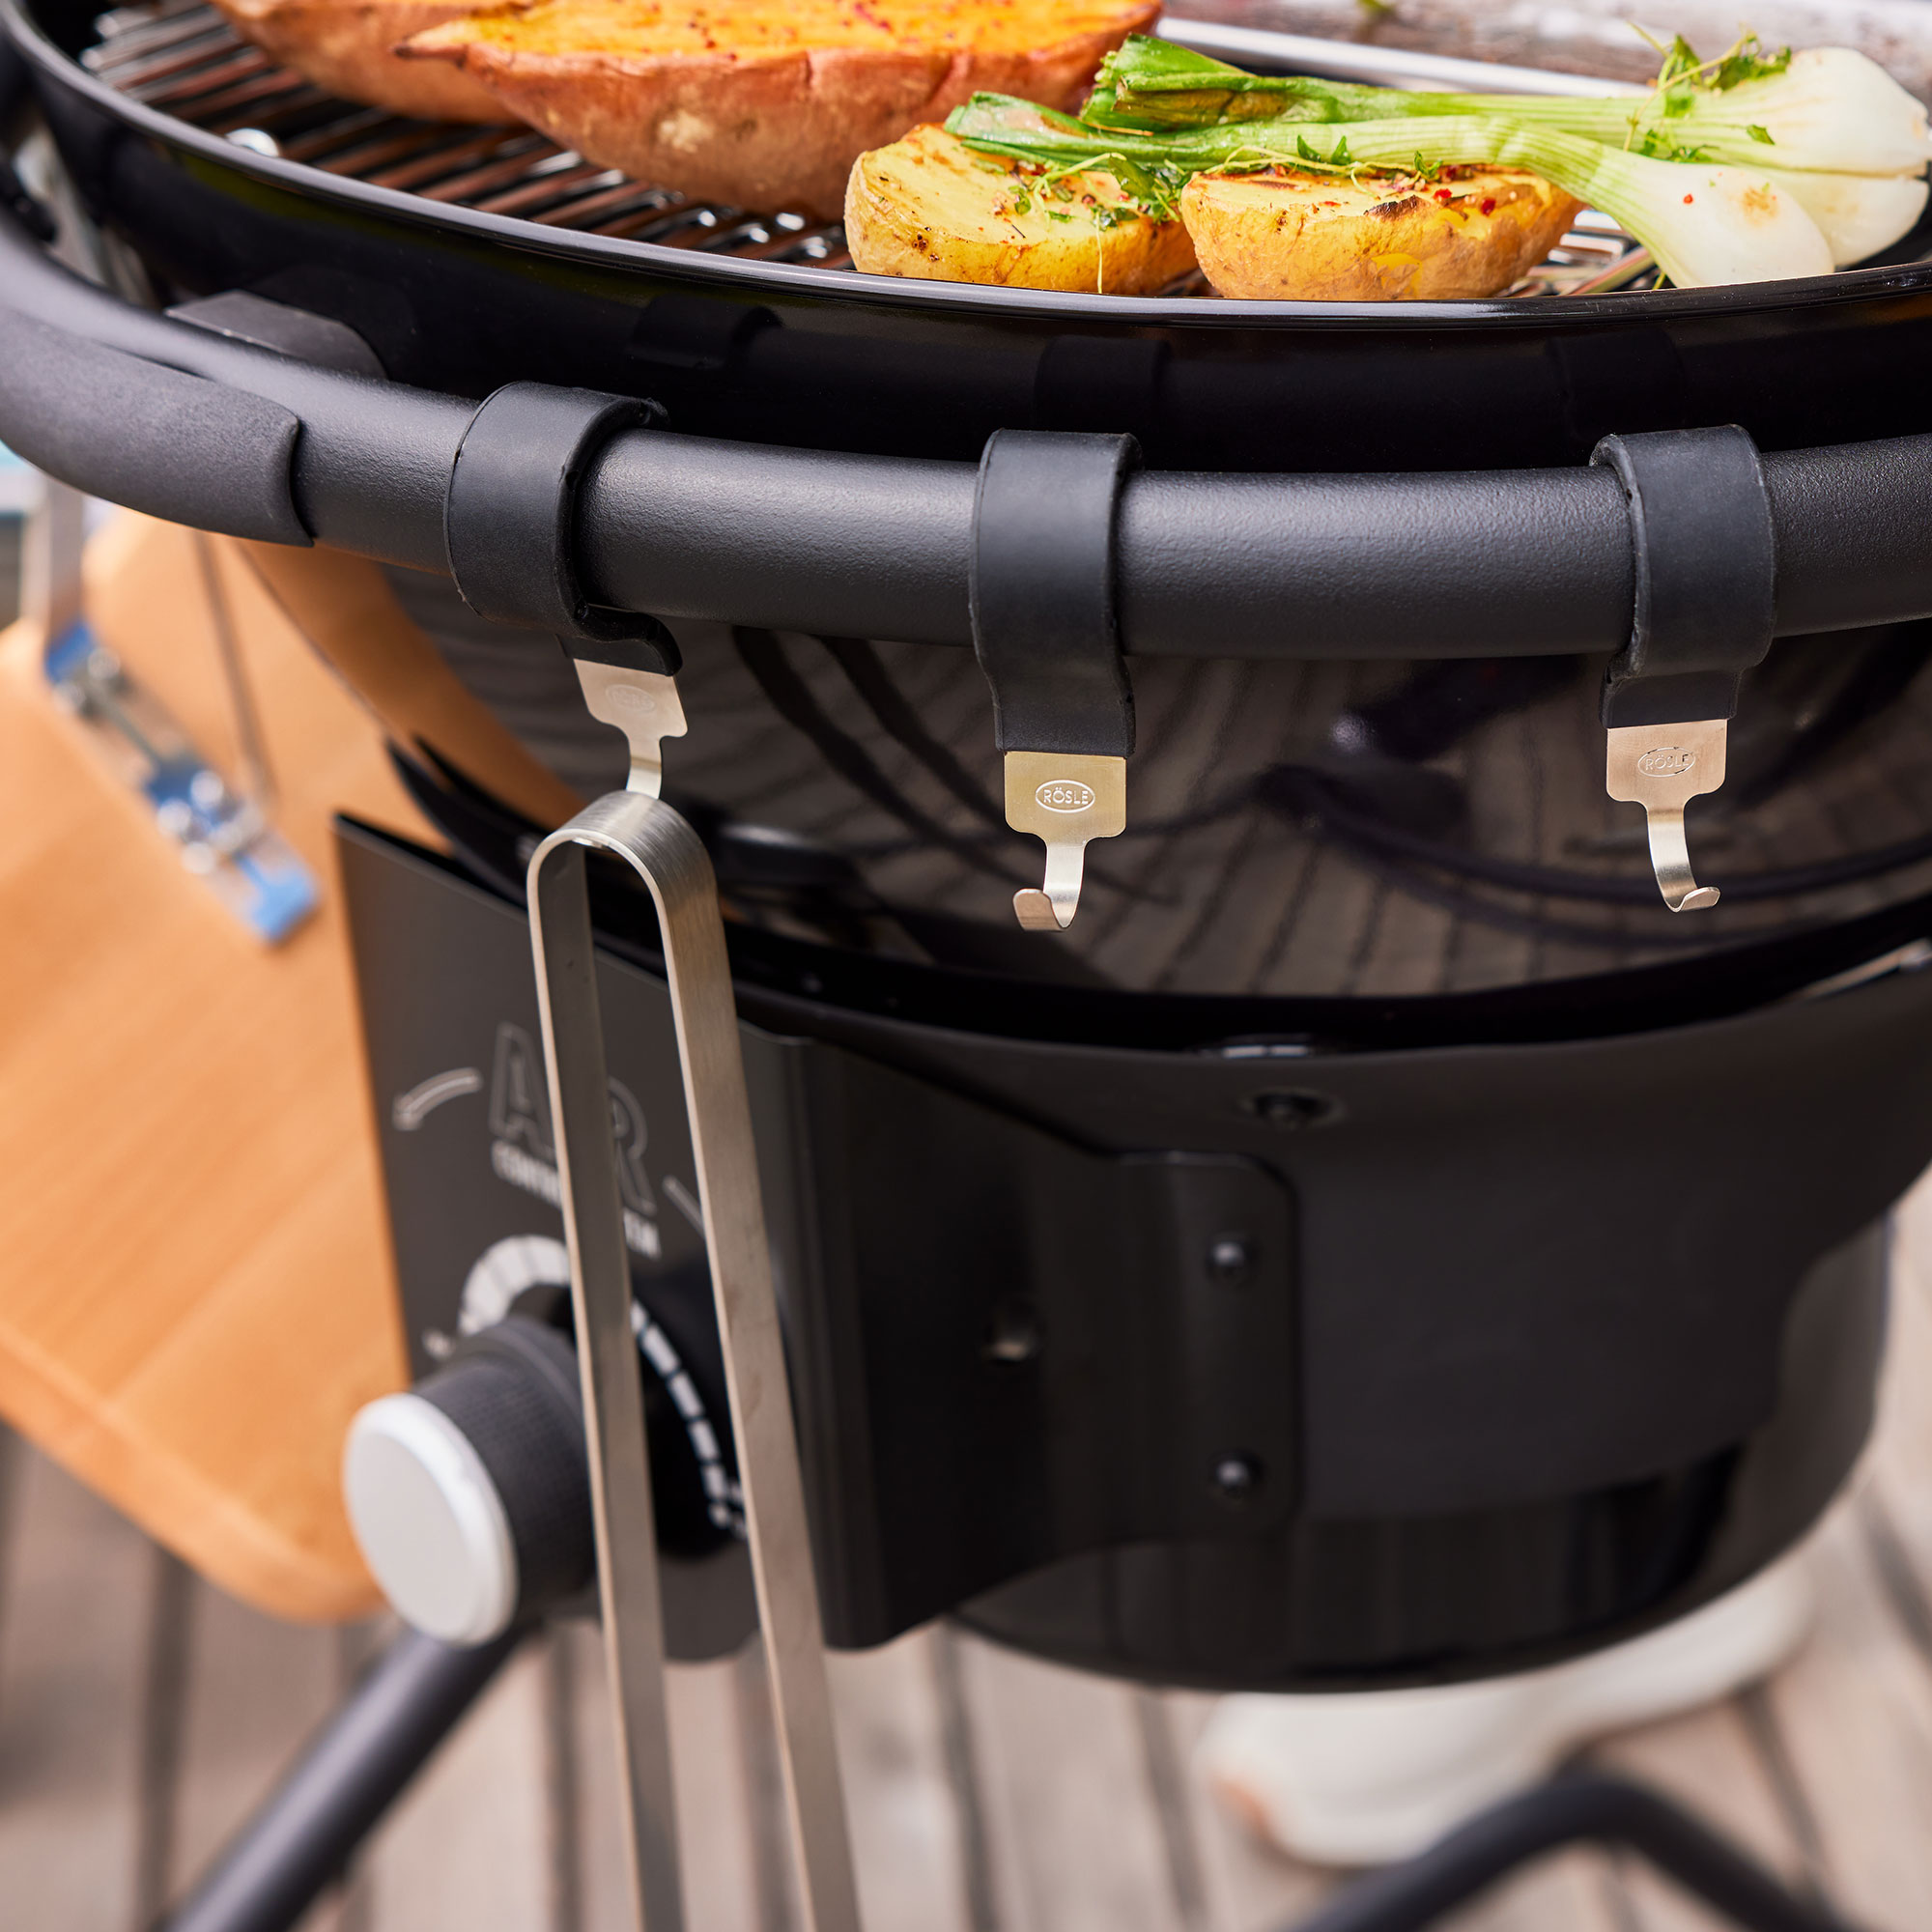 Charcoal kettle grill No.1 F50 AIR PRO VARIO+